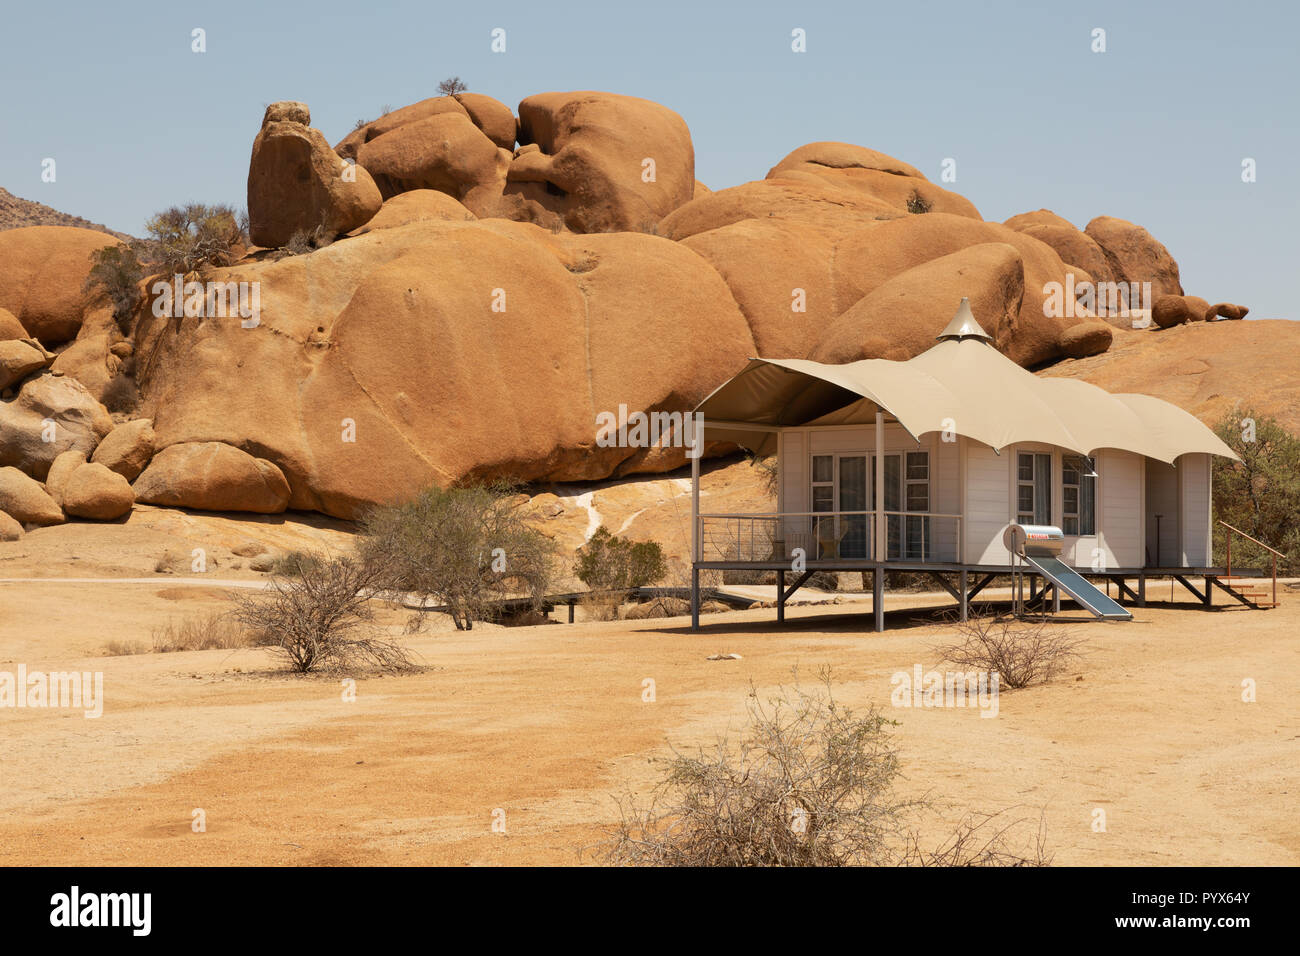 Chalets at Spitzkoppe Lodge, luxury tourist accommodation in the desert, Spitzkoppe, Namibia Africa Stock Photo